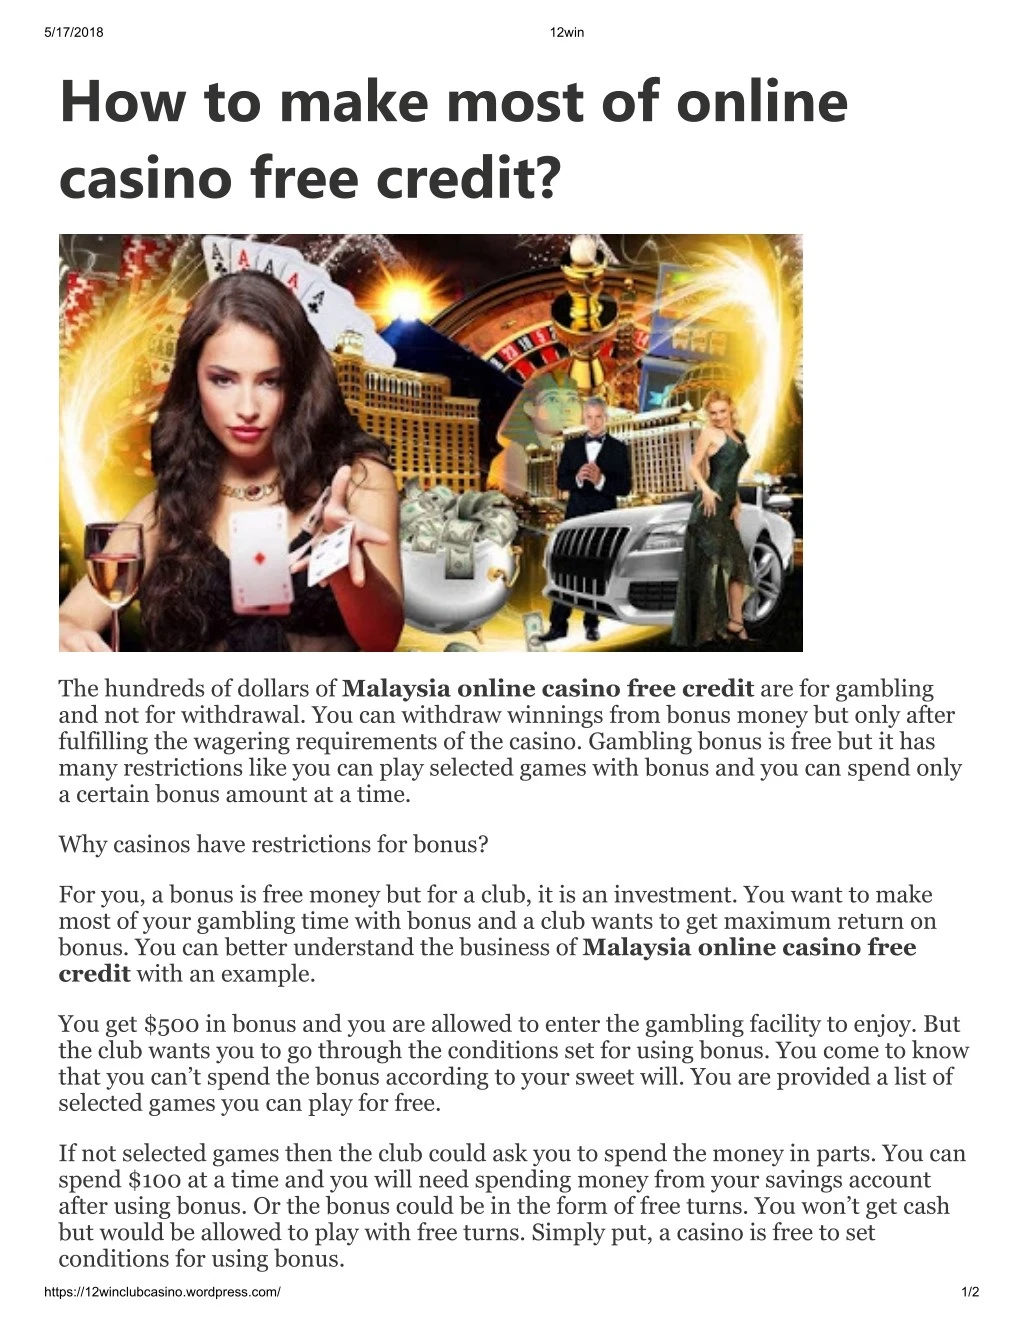 5 17 2018 how to make most of online casino free